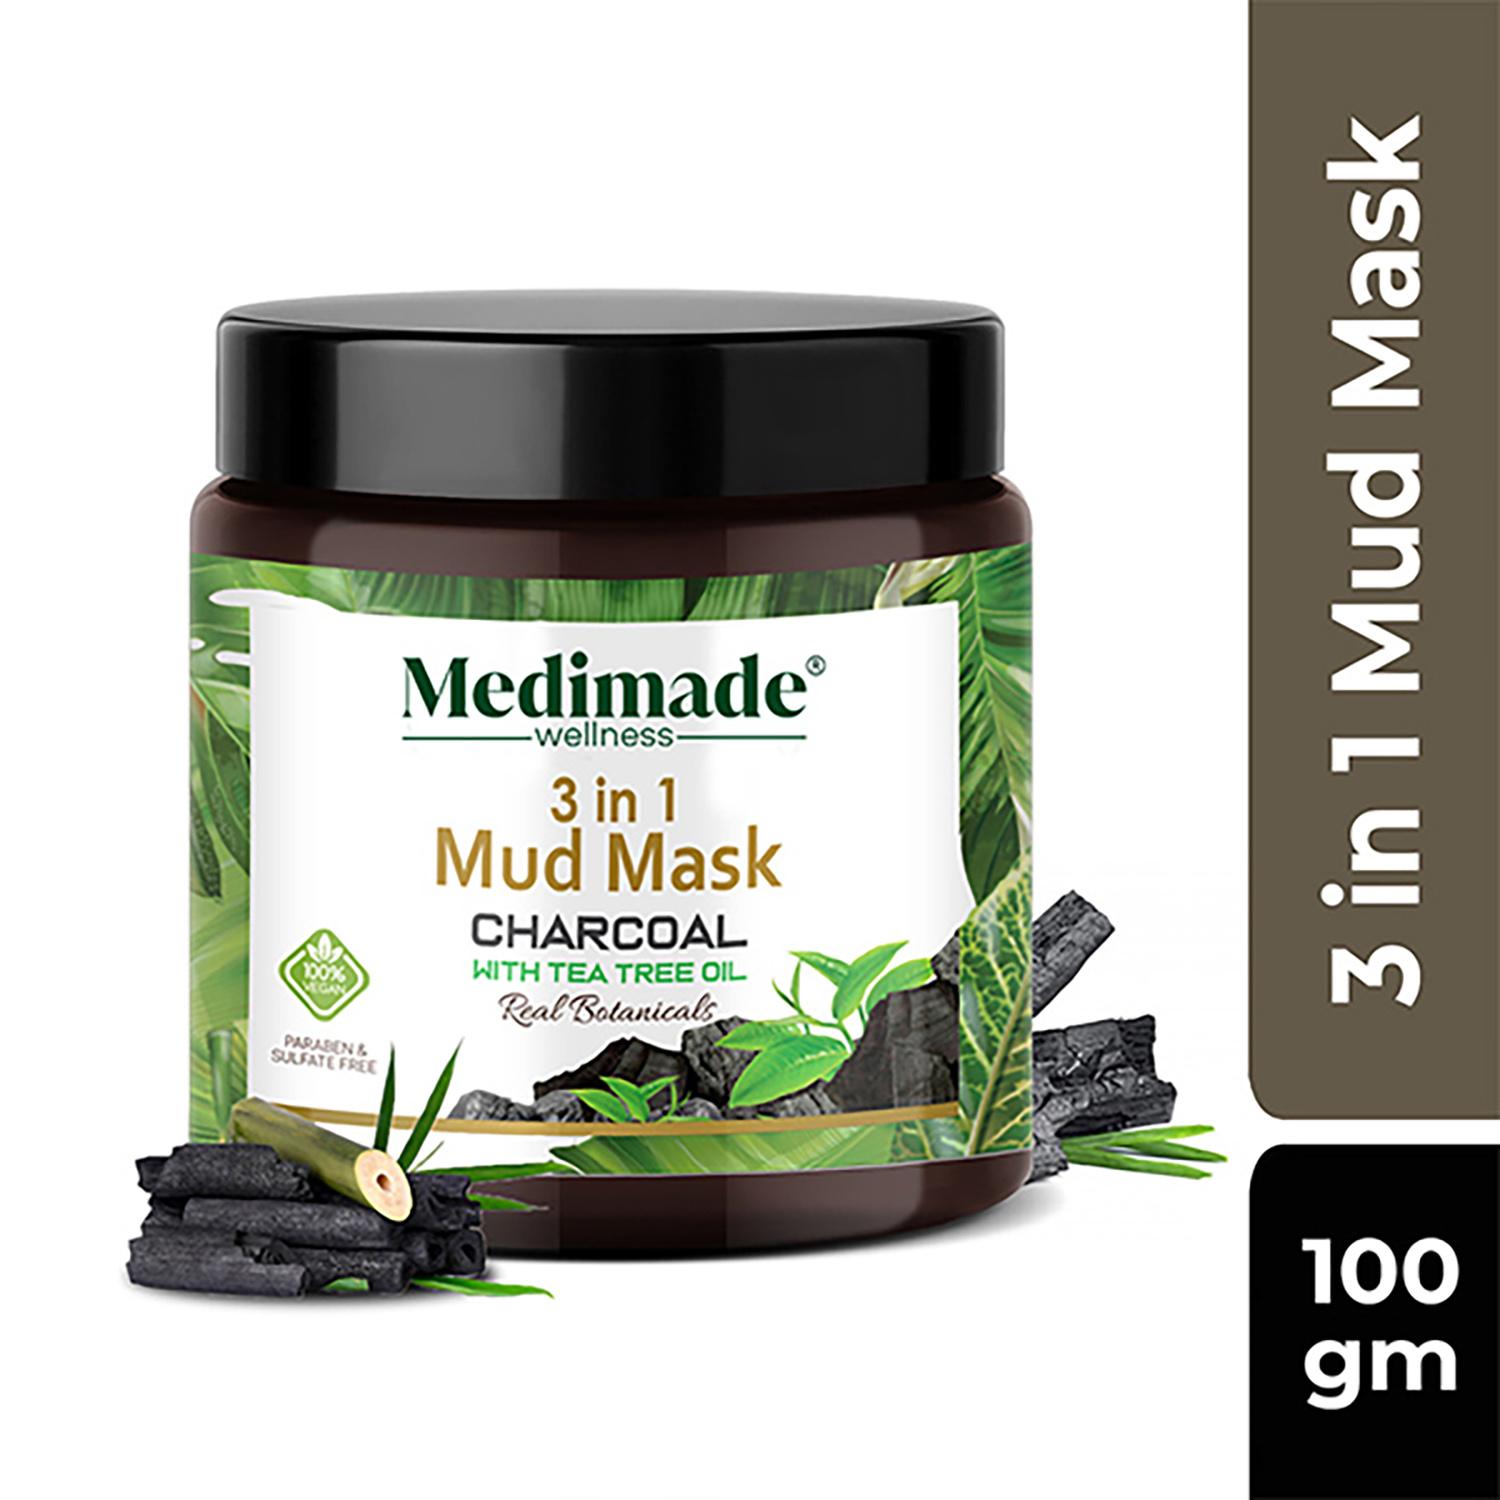 Medimade | Medimade Charcoal With Tea Tree Oil 3 In 1 Mud Mask (100g)